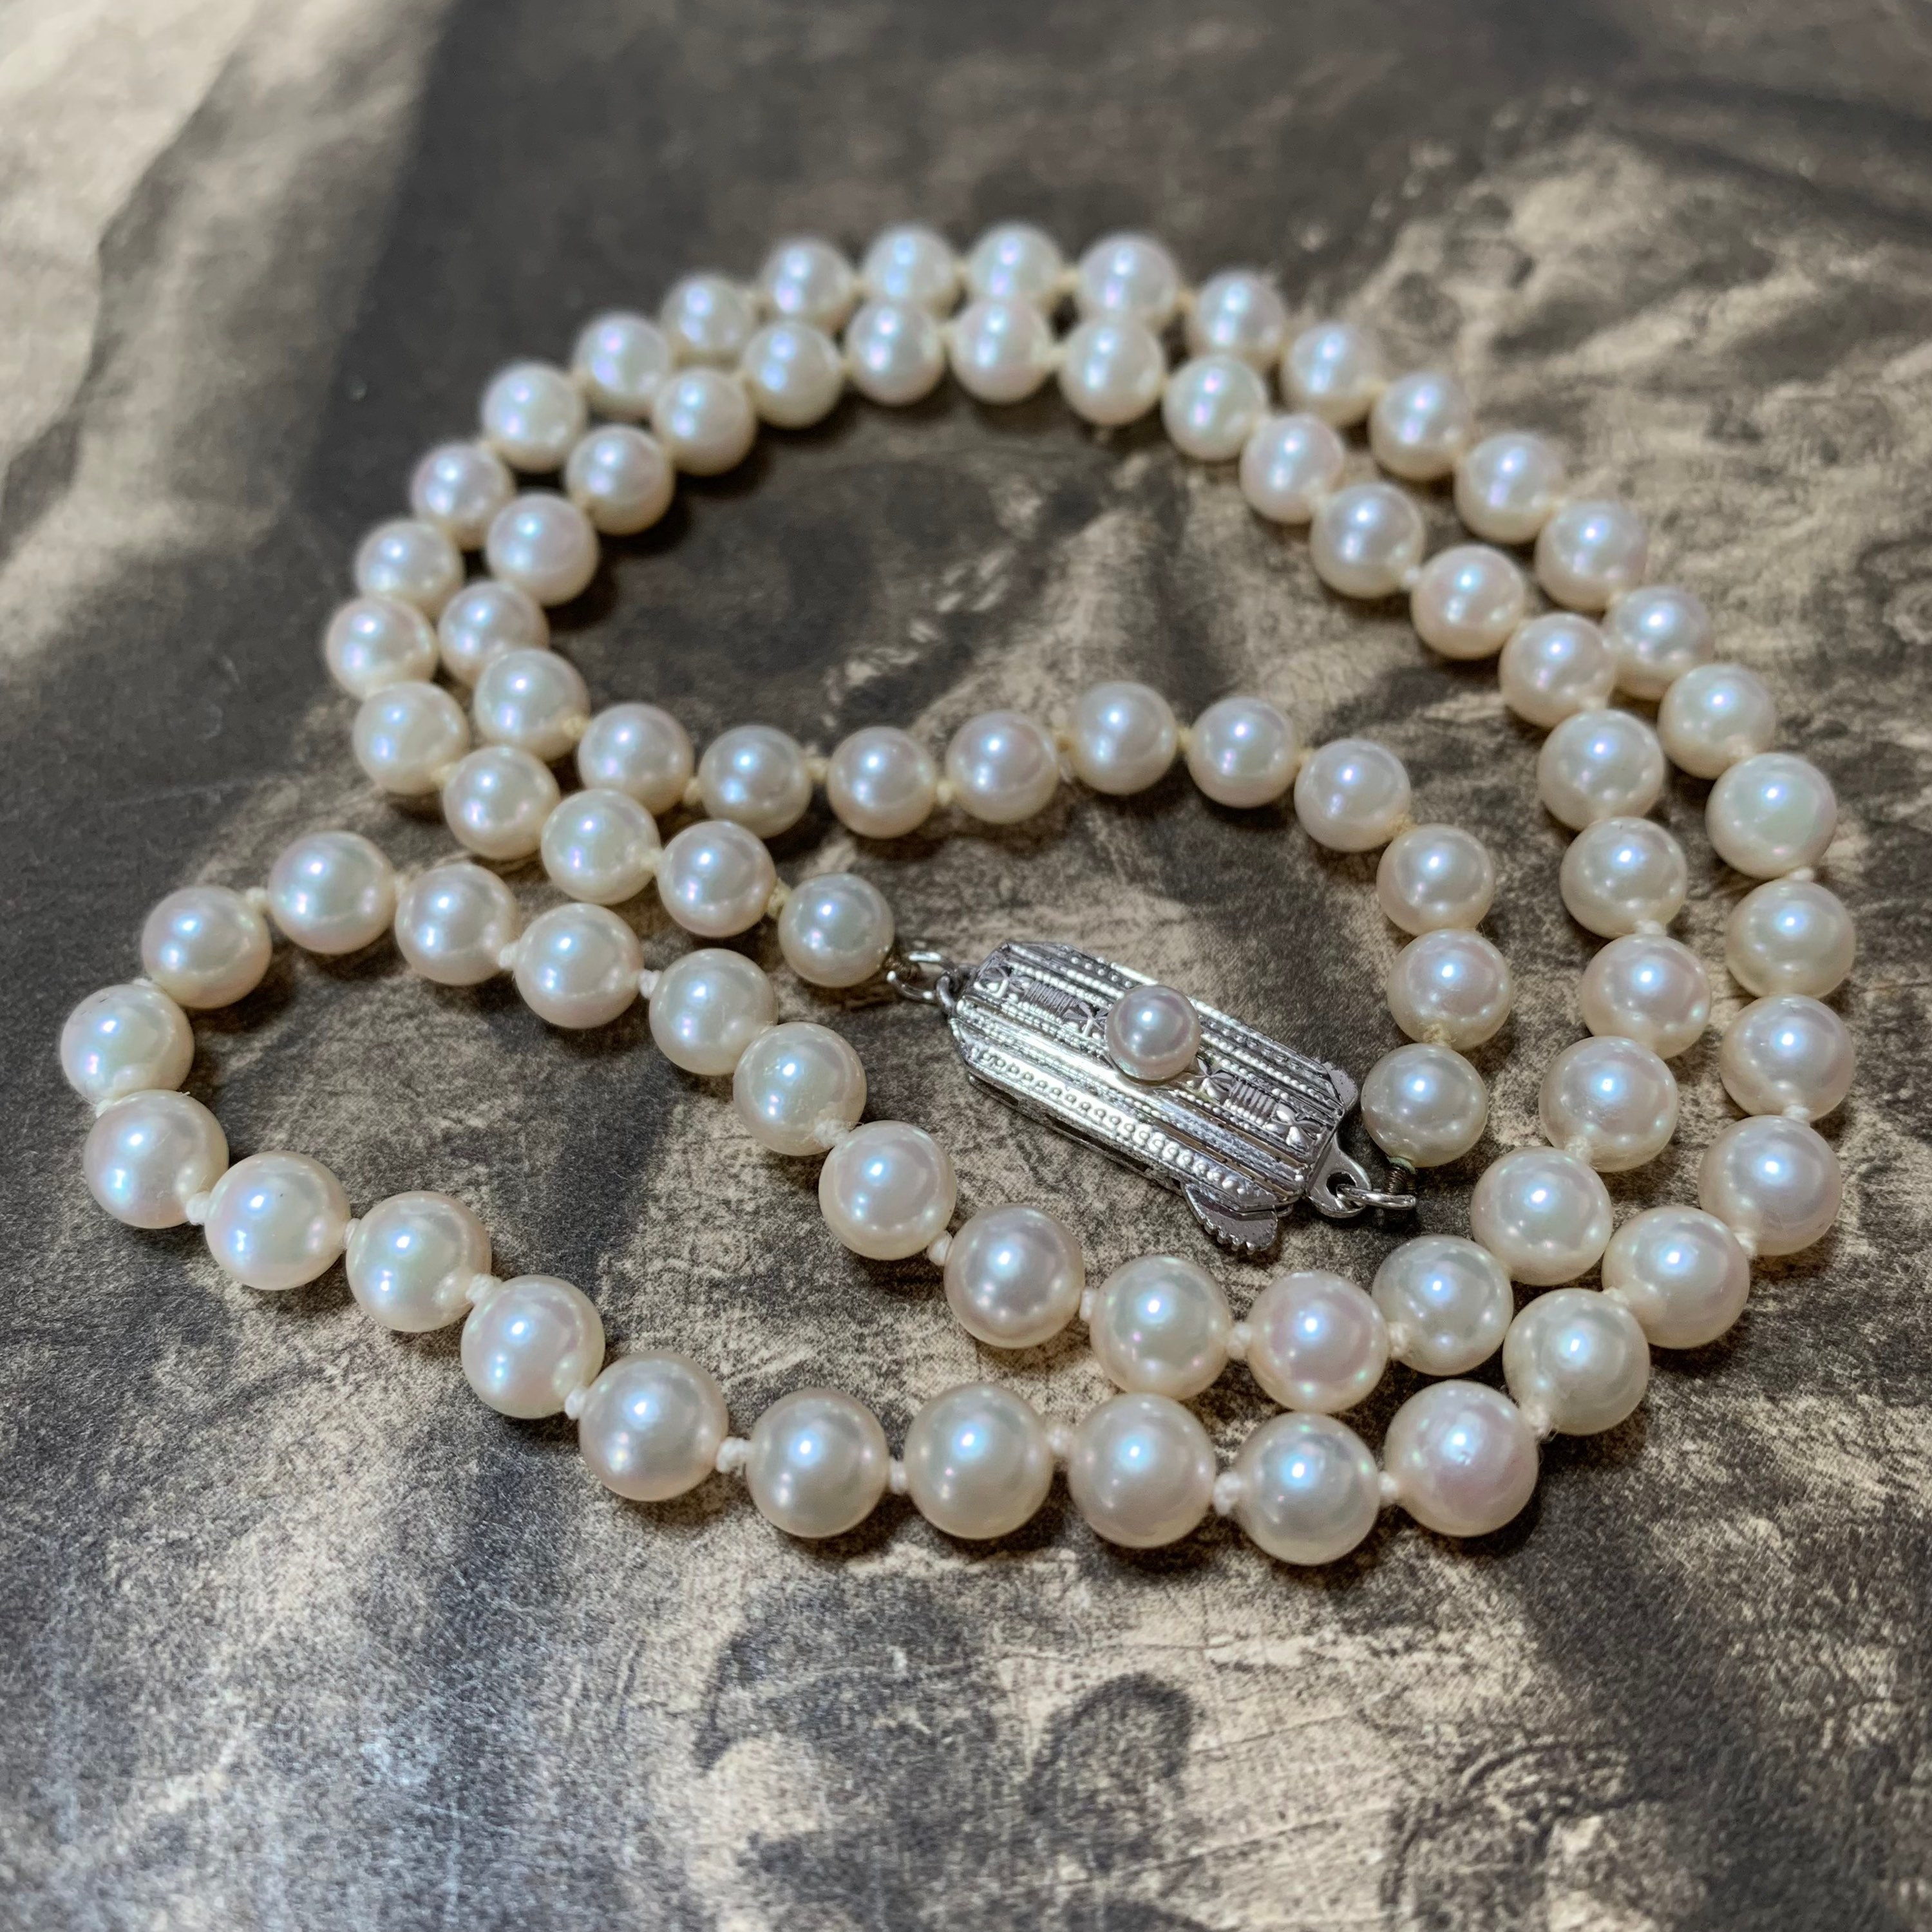 Vintage Mikimoto Akoya Pearl Necklace With Silver & Clasp. This Is A Beautiful 19 Inch Necklace For Formal As Well Casual Ware